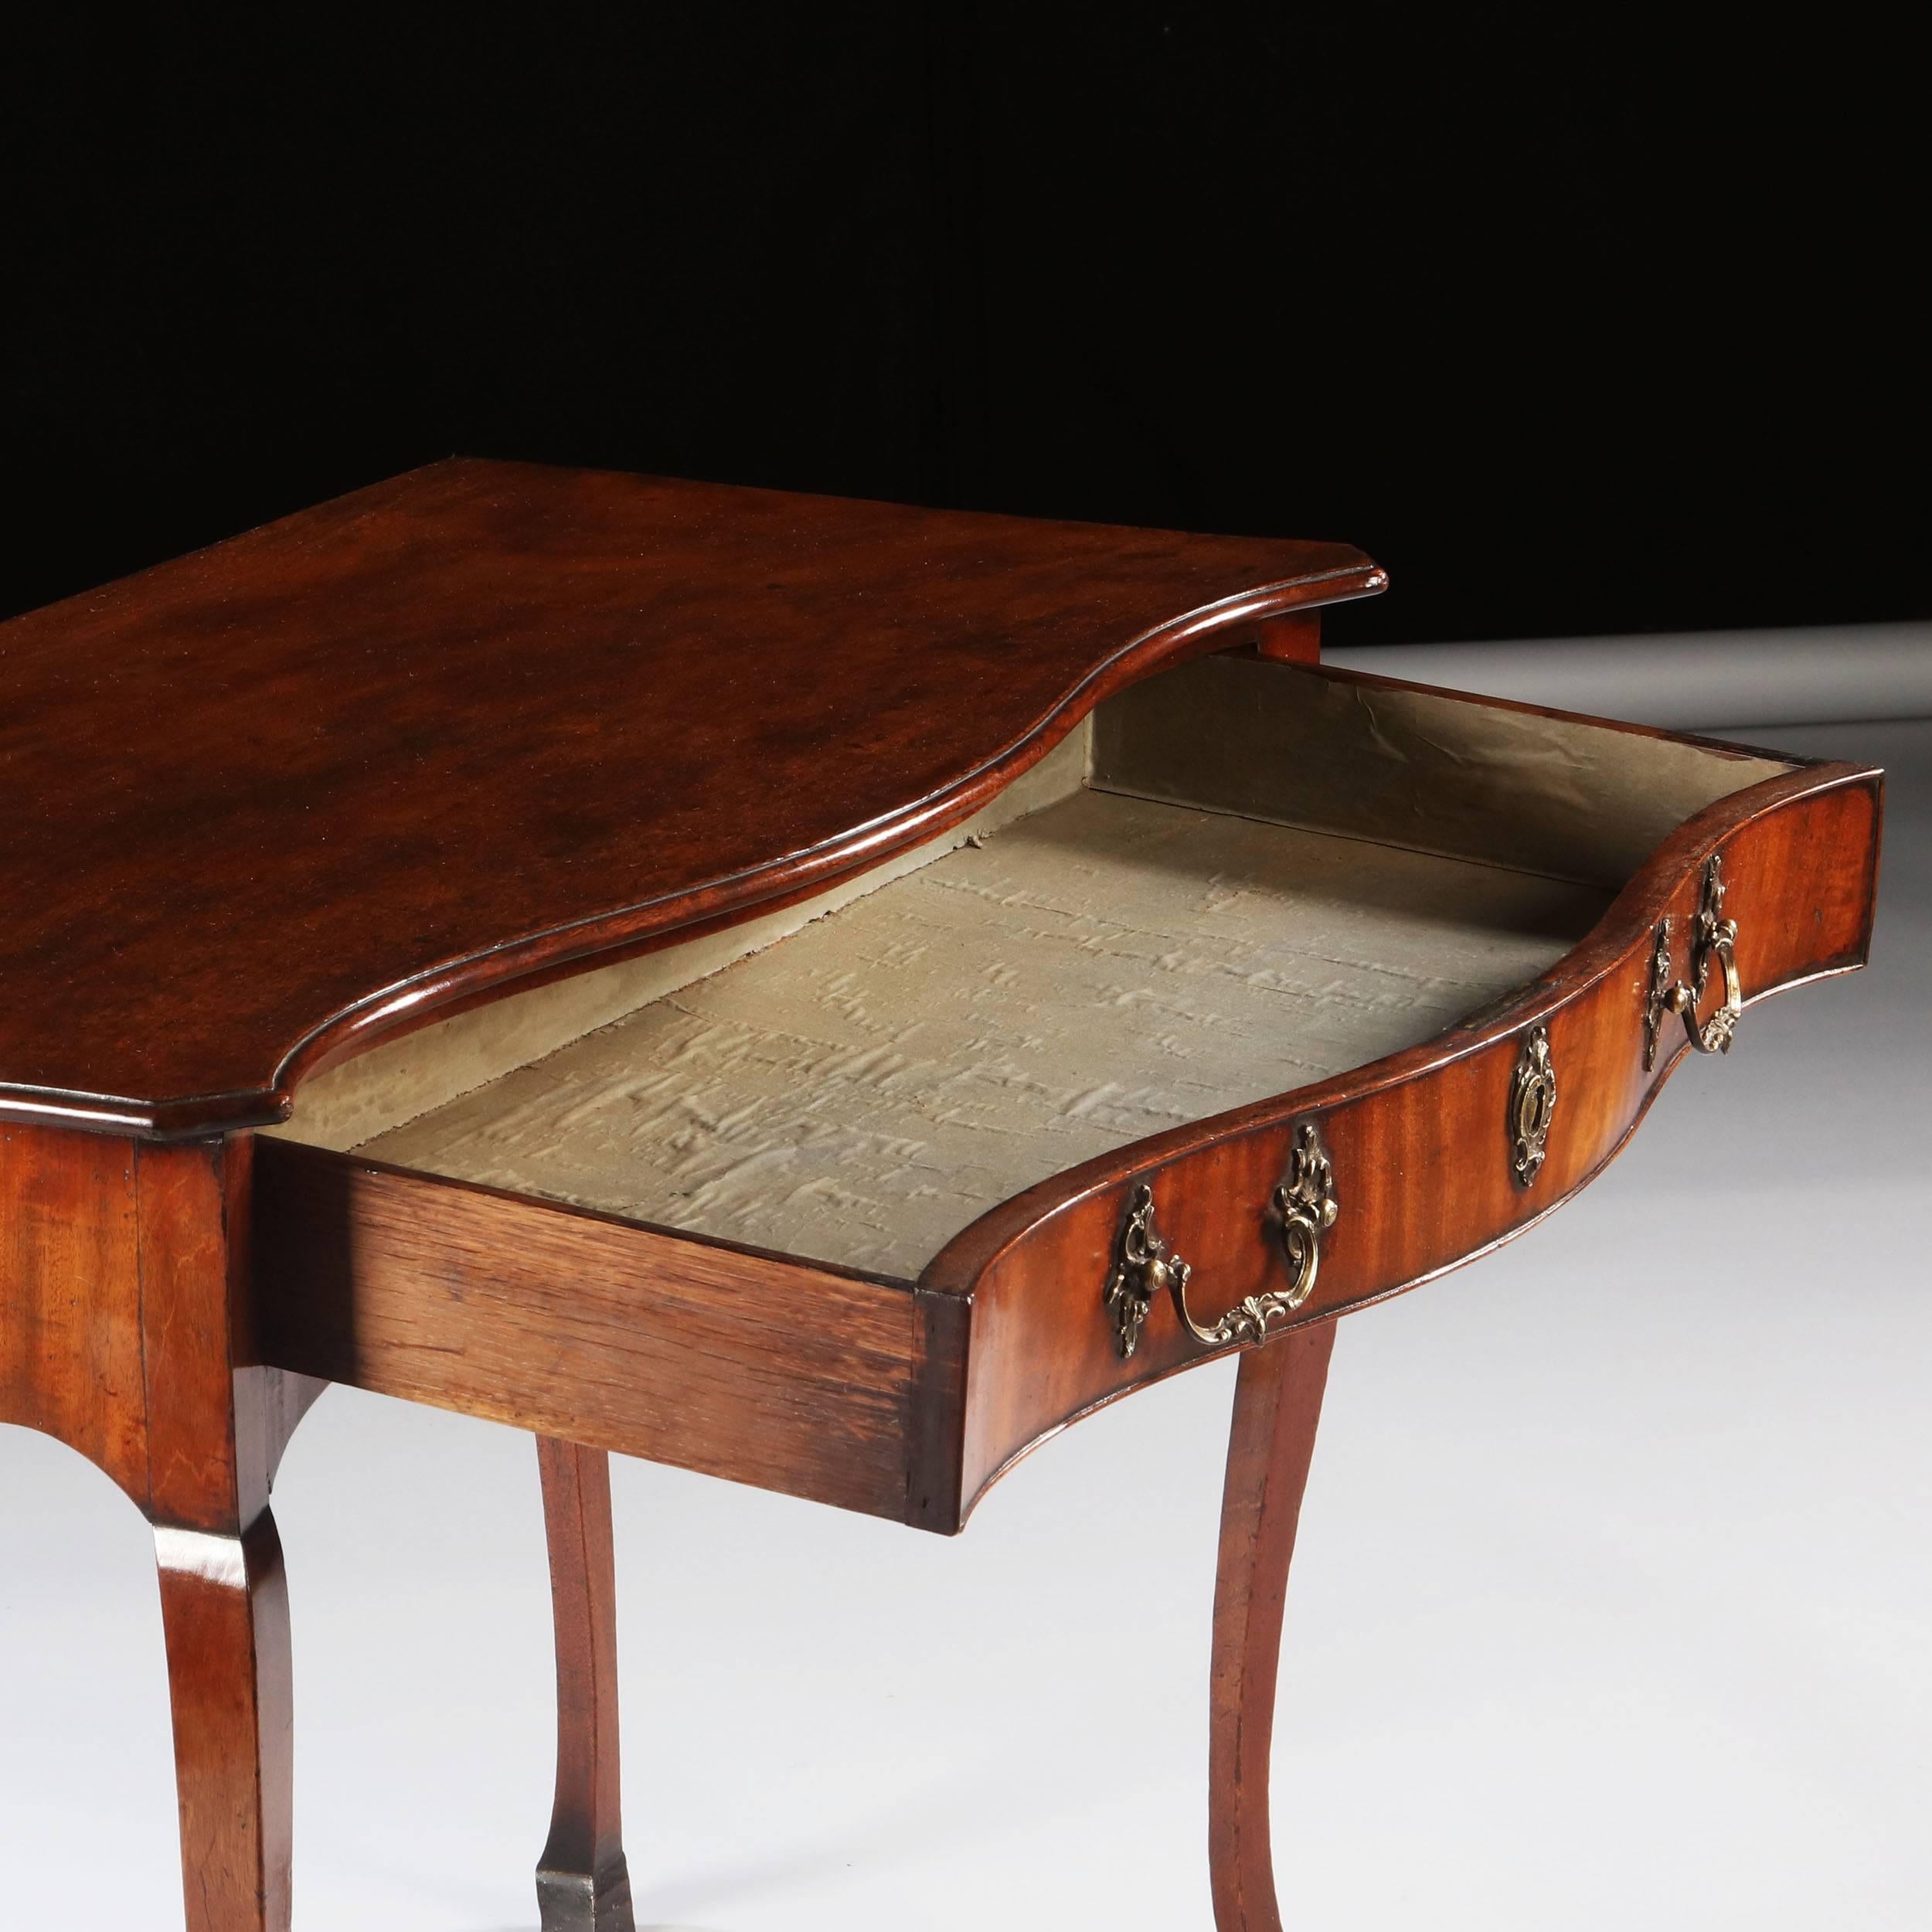 18th Century Serpentine George III Chippendale Mahogany Side Table In Excellent Condition In London, by appointment only